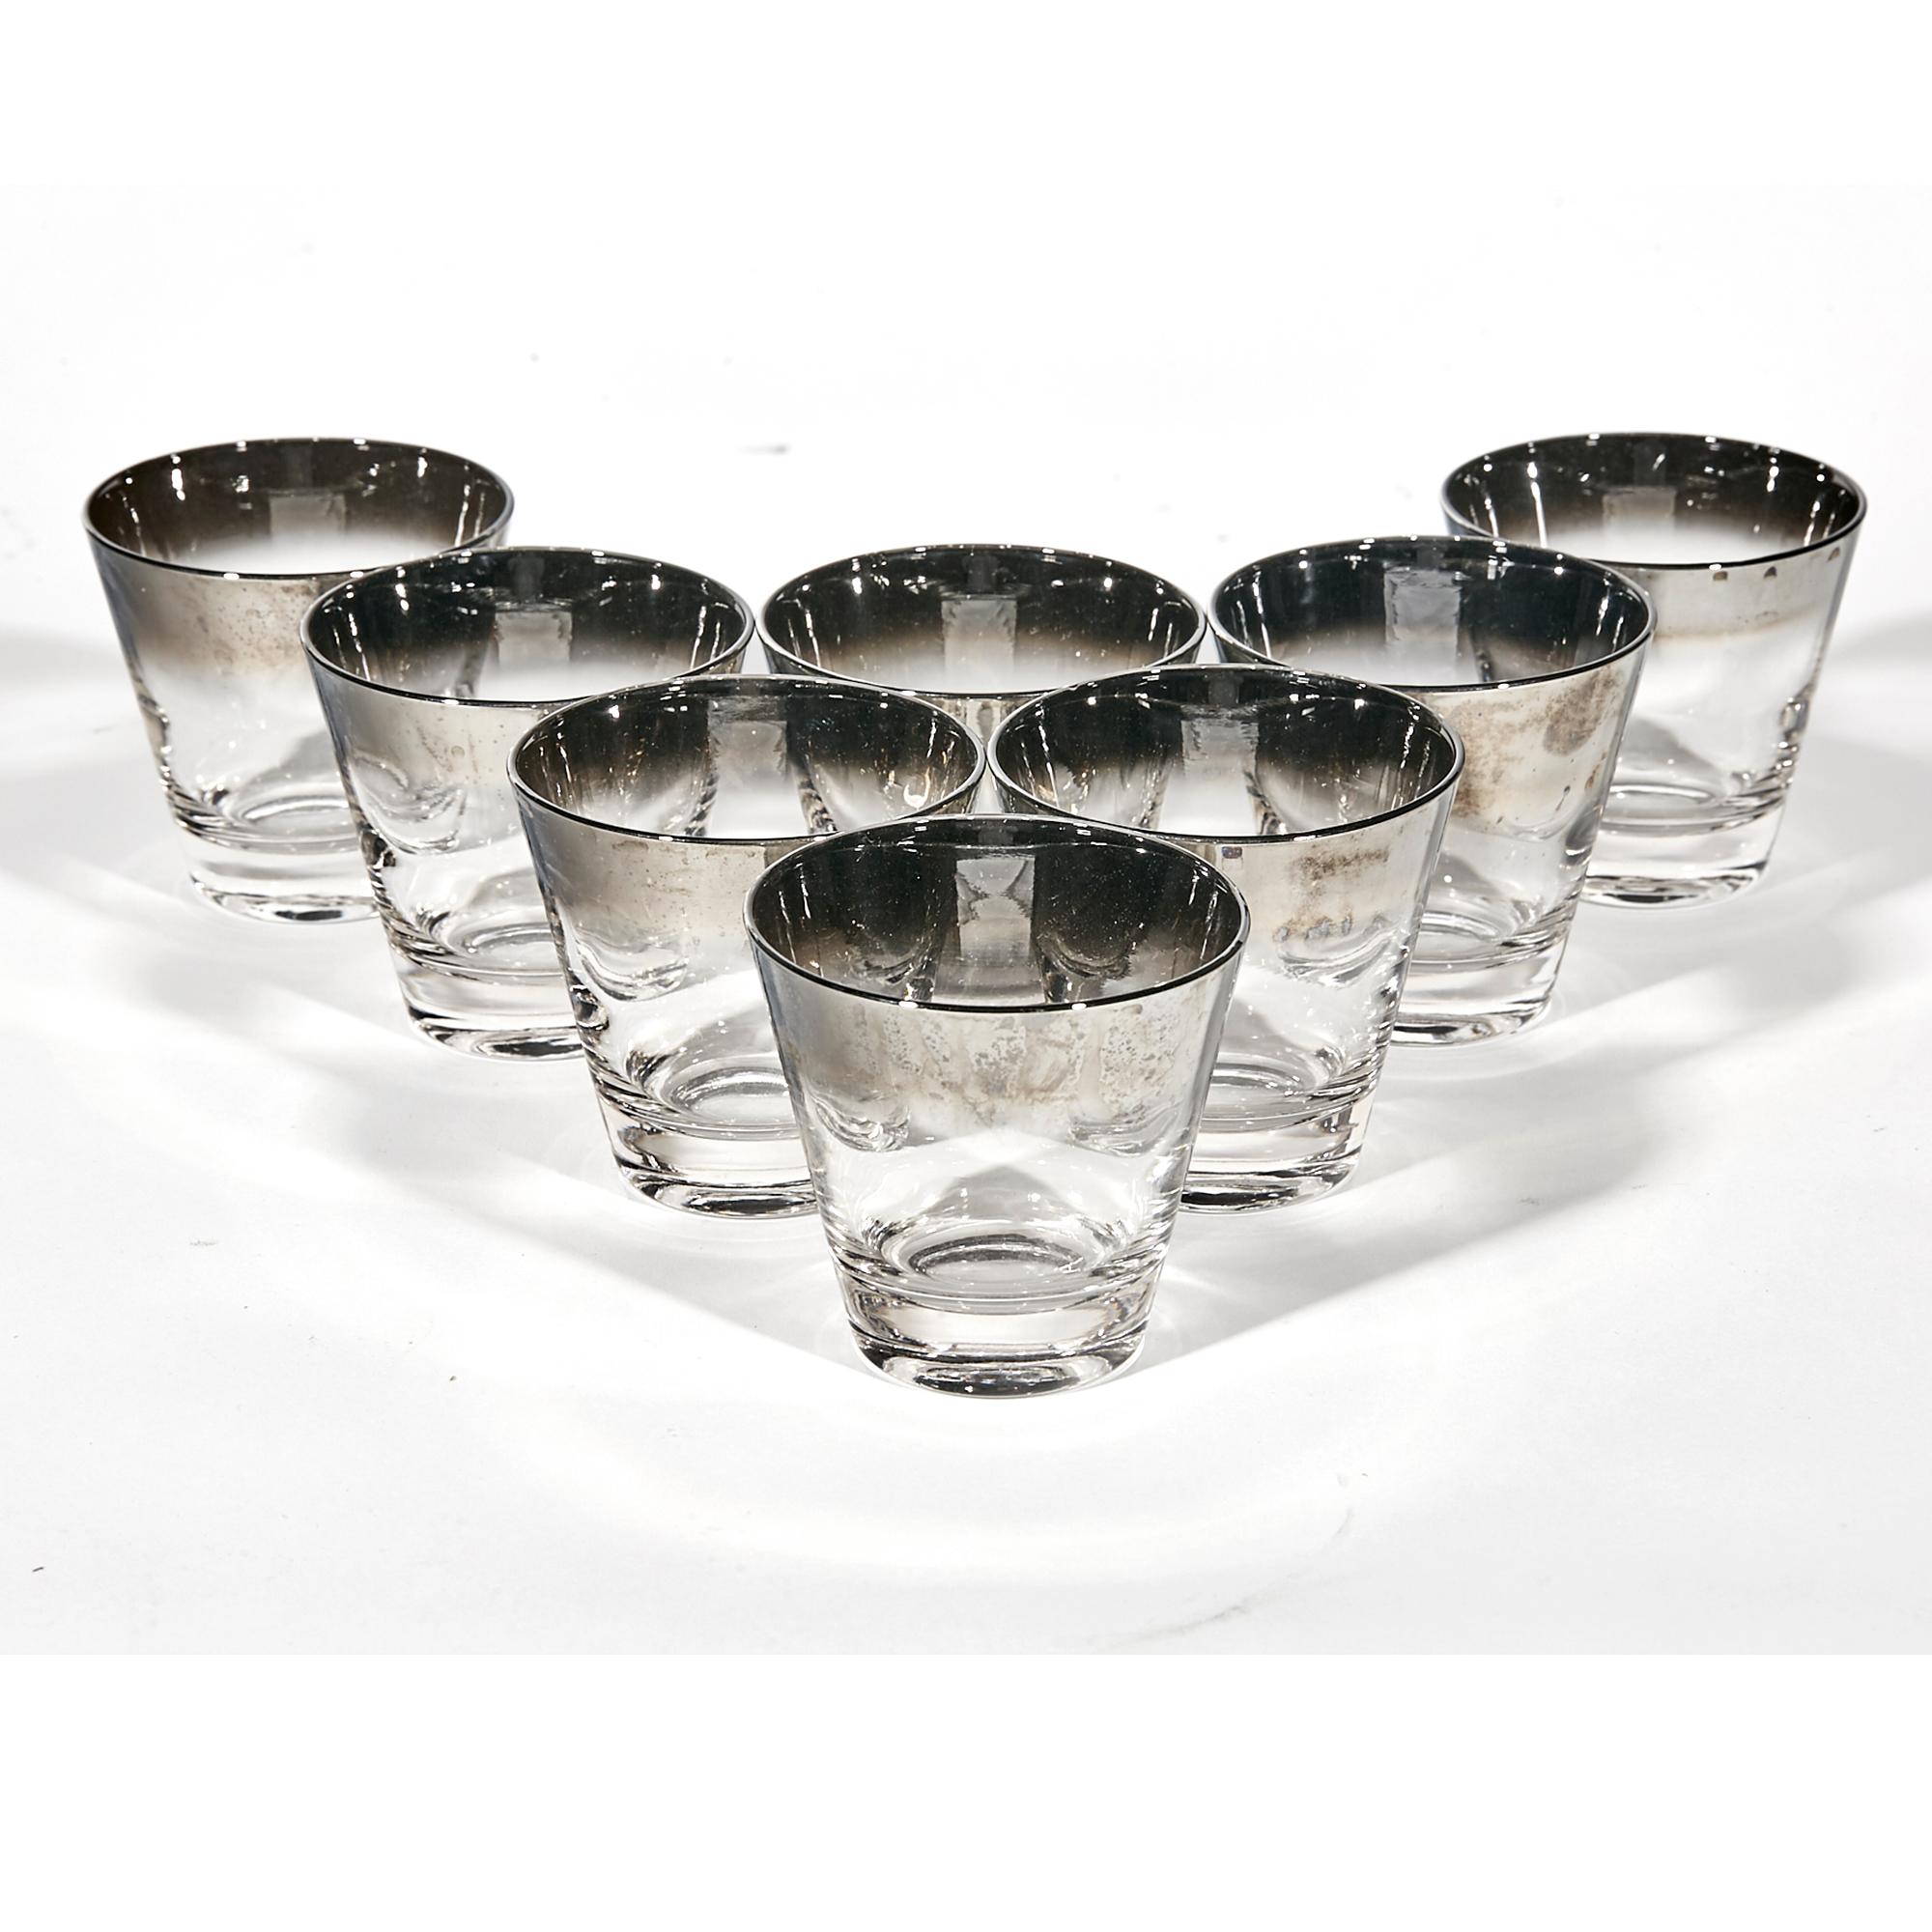 Vintage set of 8 silver-fade old fashioned glass bar tumblers. No marks. In very good used condition.